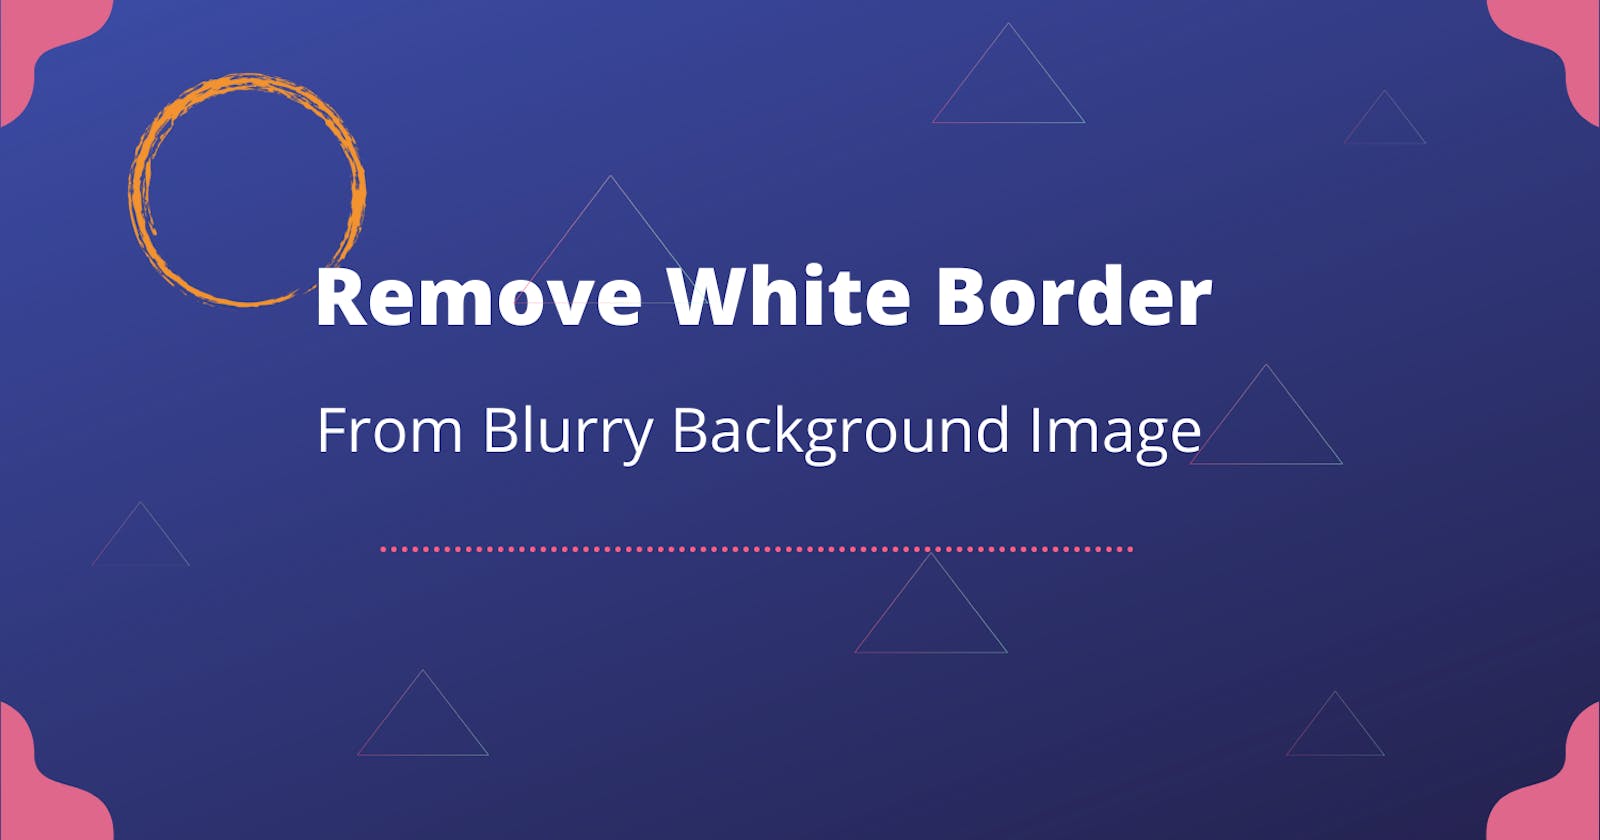 Remove White Border From Blurry Background Image